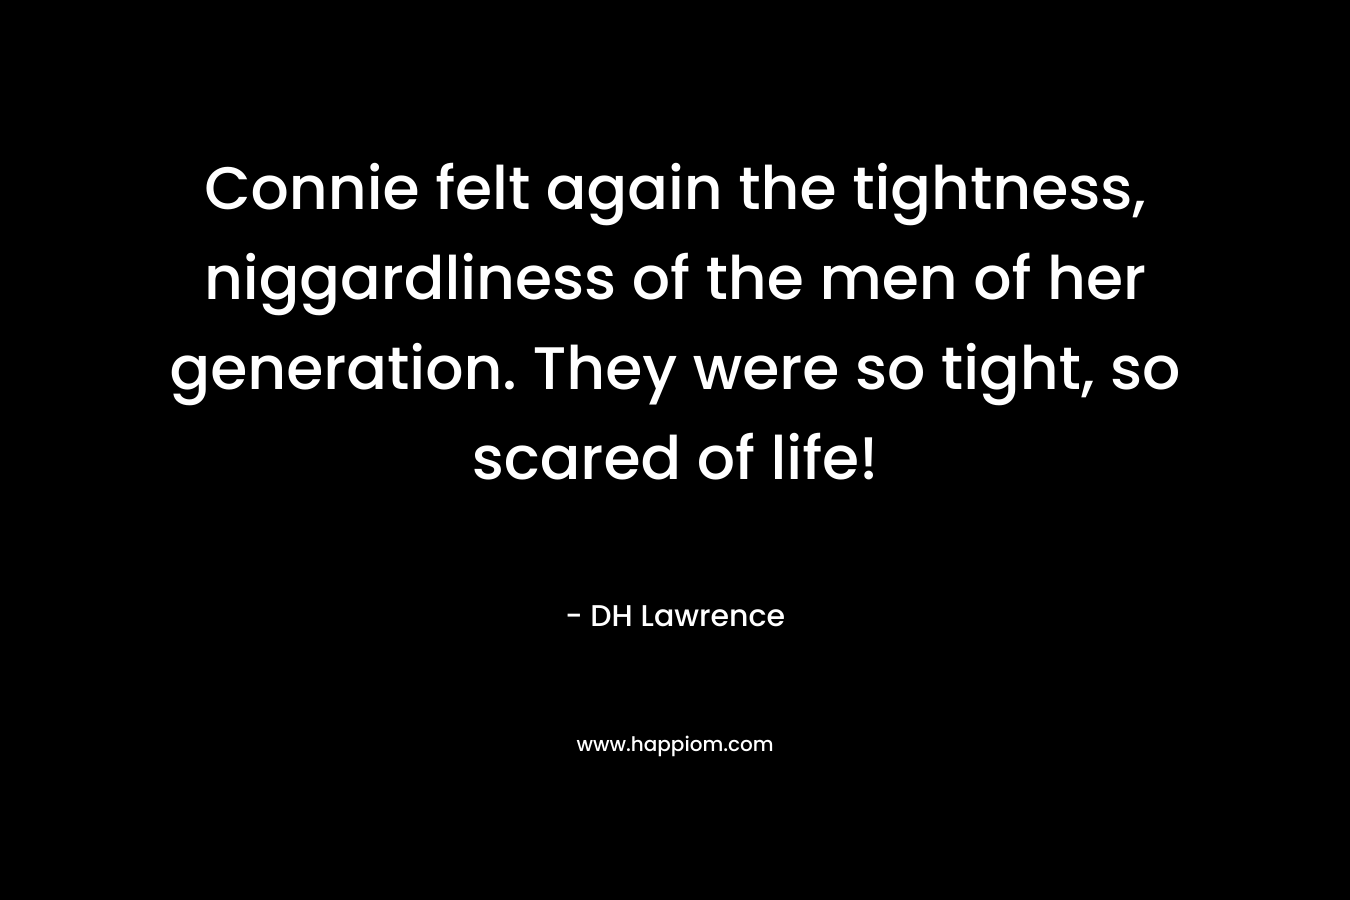 Connie felt again the tightness, niggardliness of the men of her generation. They were so tight, so scared of life! – DH Lawrence